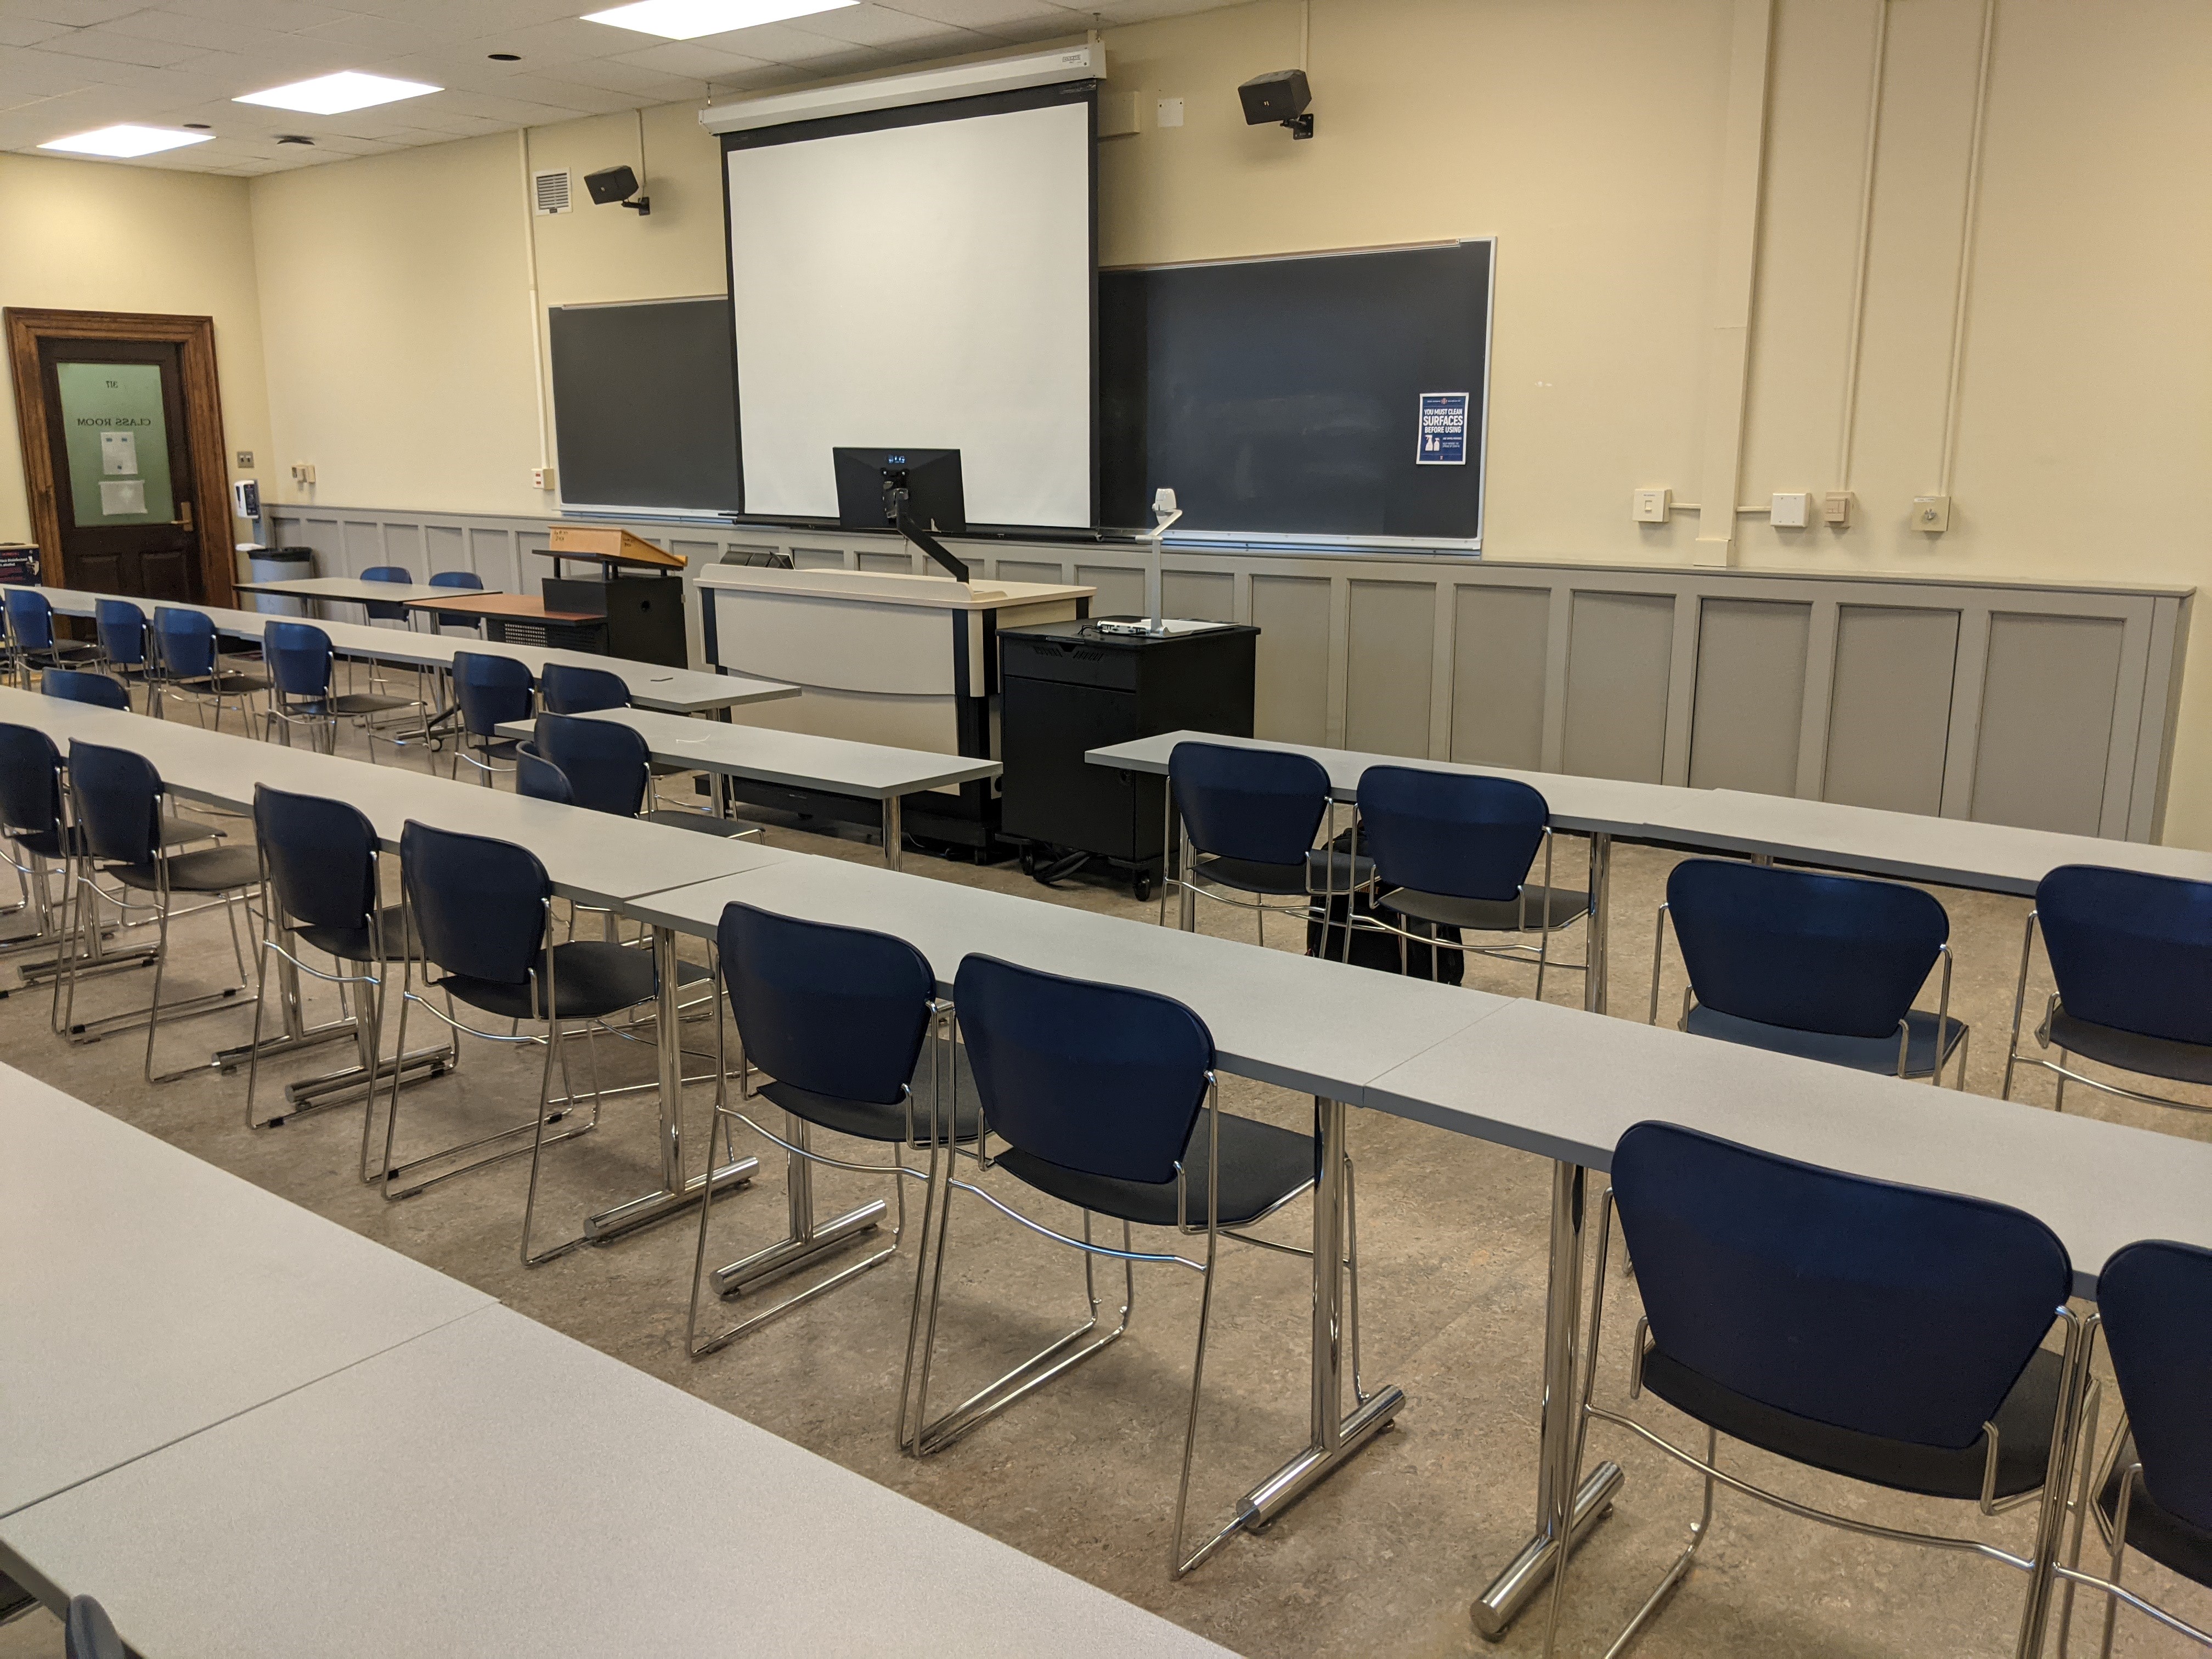 A view of the classroom with movable tables and chairs, chalkboards, and instructor table in front.